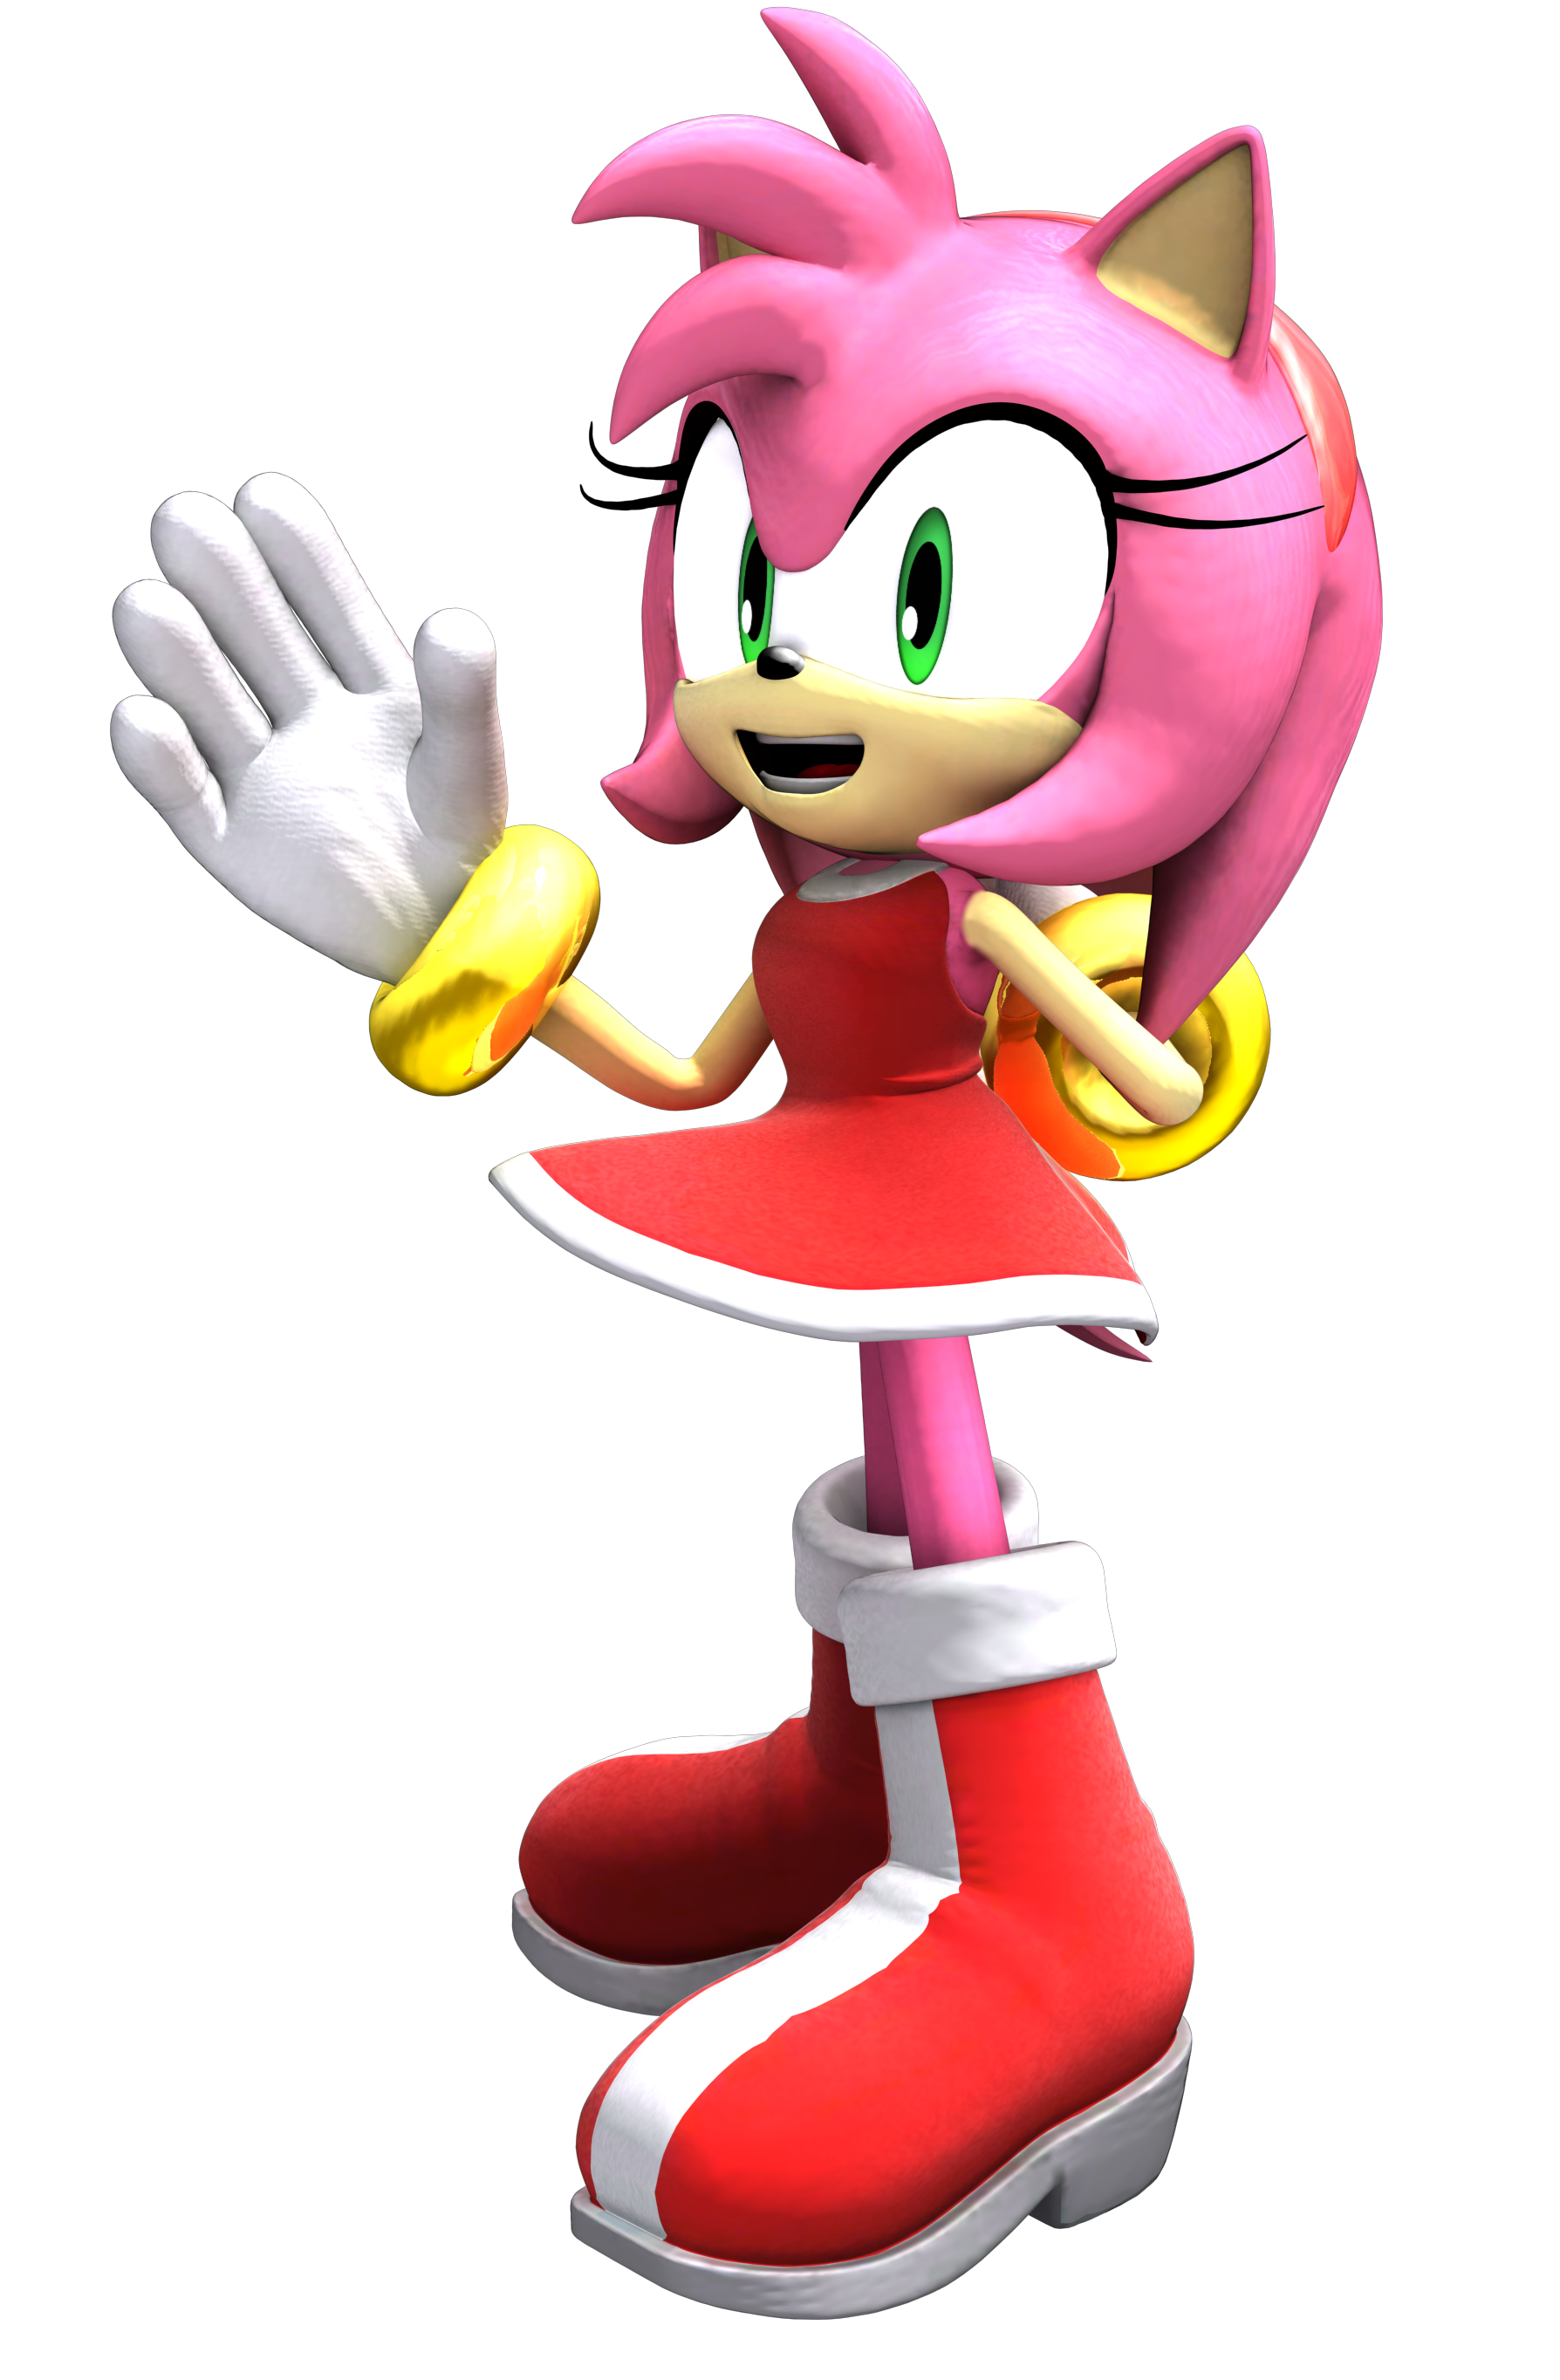 Amy Rose Sonic Fanon Wiki The Sonic Fanfiction Wiki That Anyone Can 8532